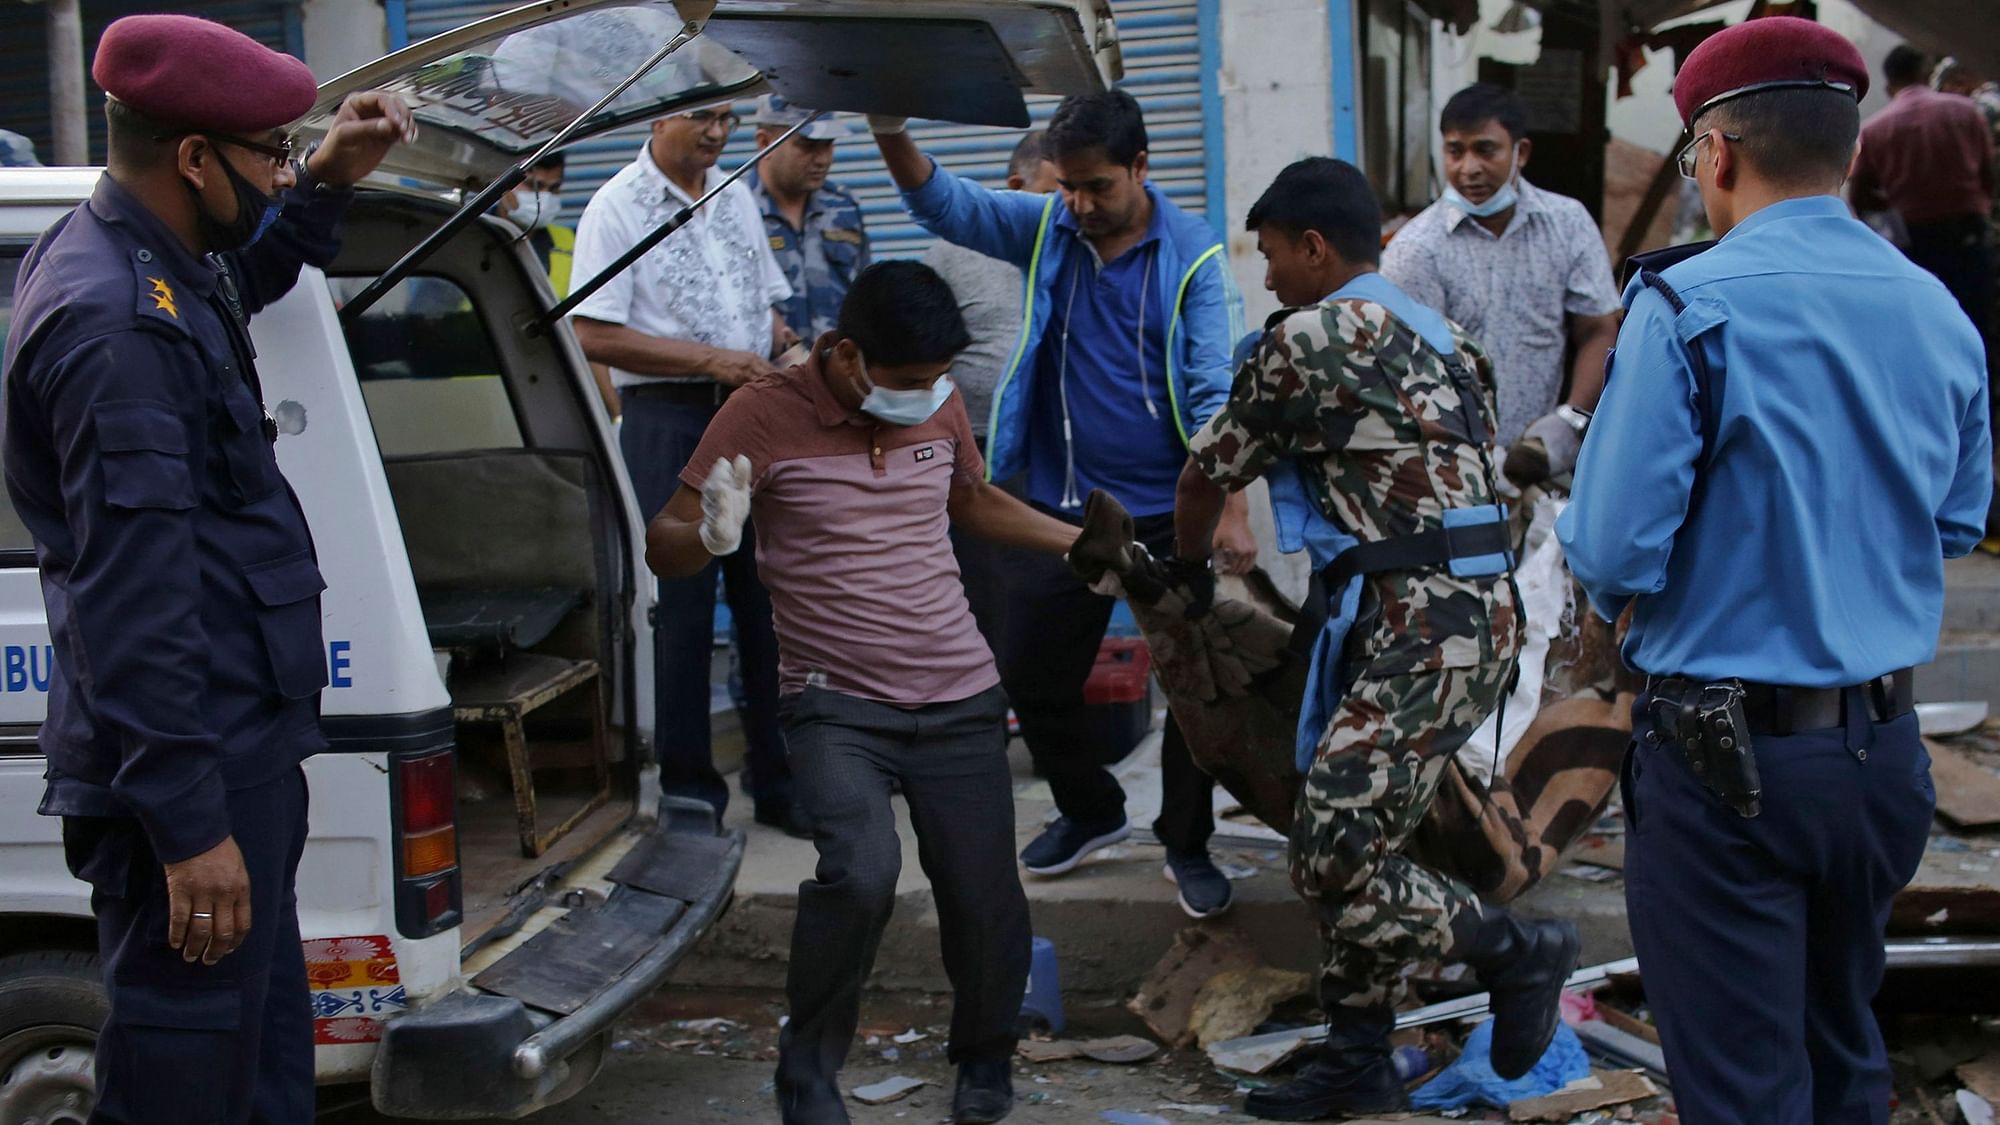 The body of a victim is removed from the site of an explosion in Kathmandu, Nepal.